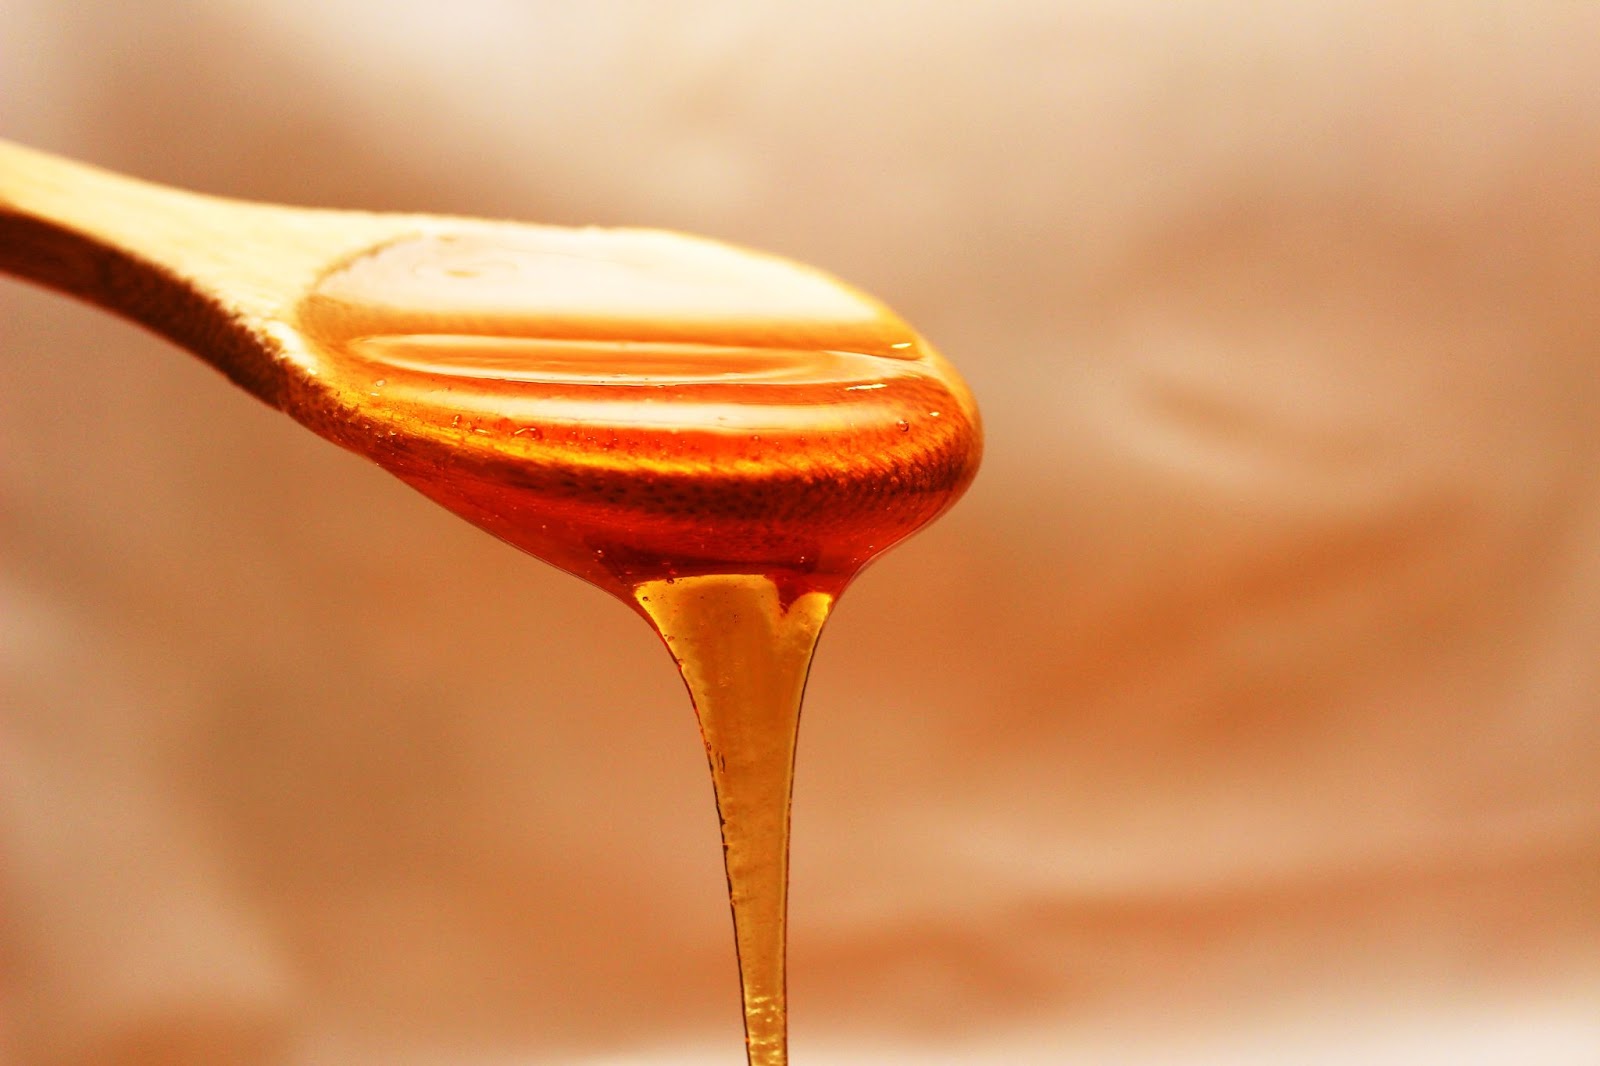 Compare date sugar to honey or maple syrup. Honey dripping from a spoon. 